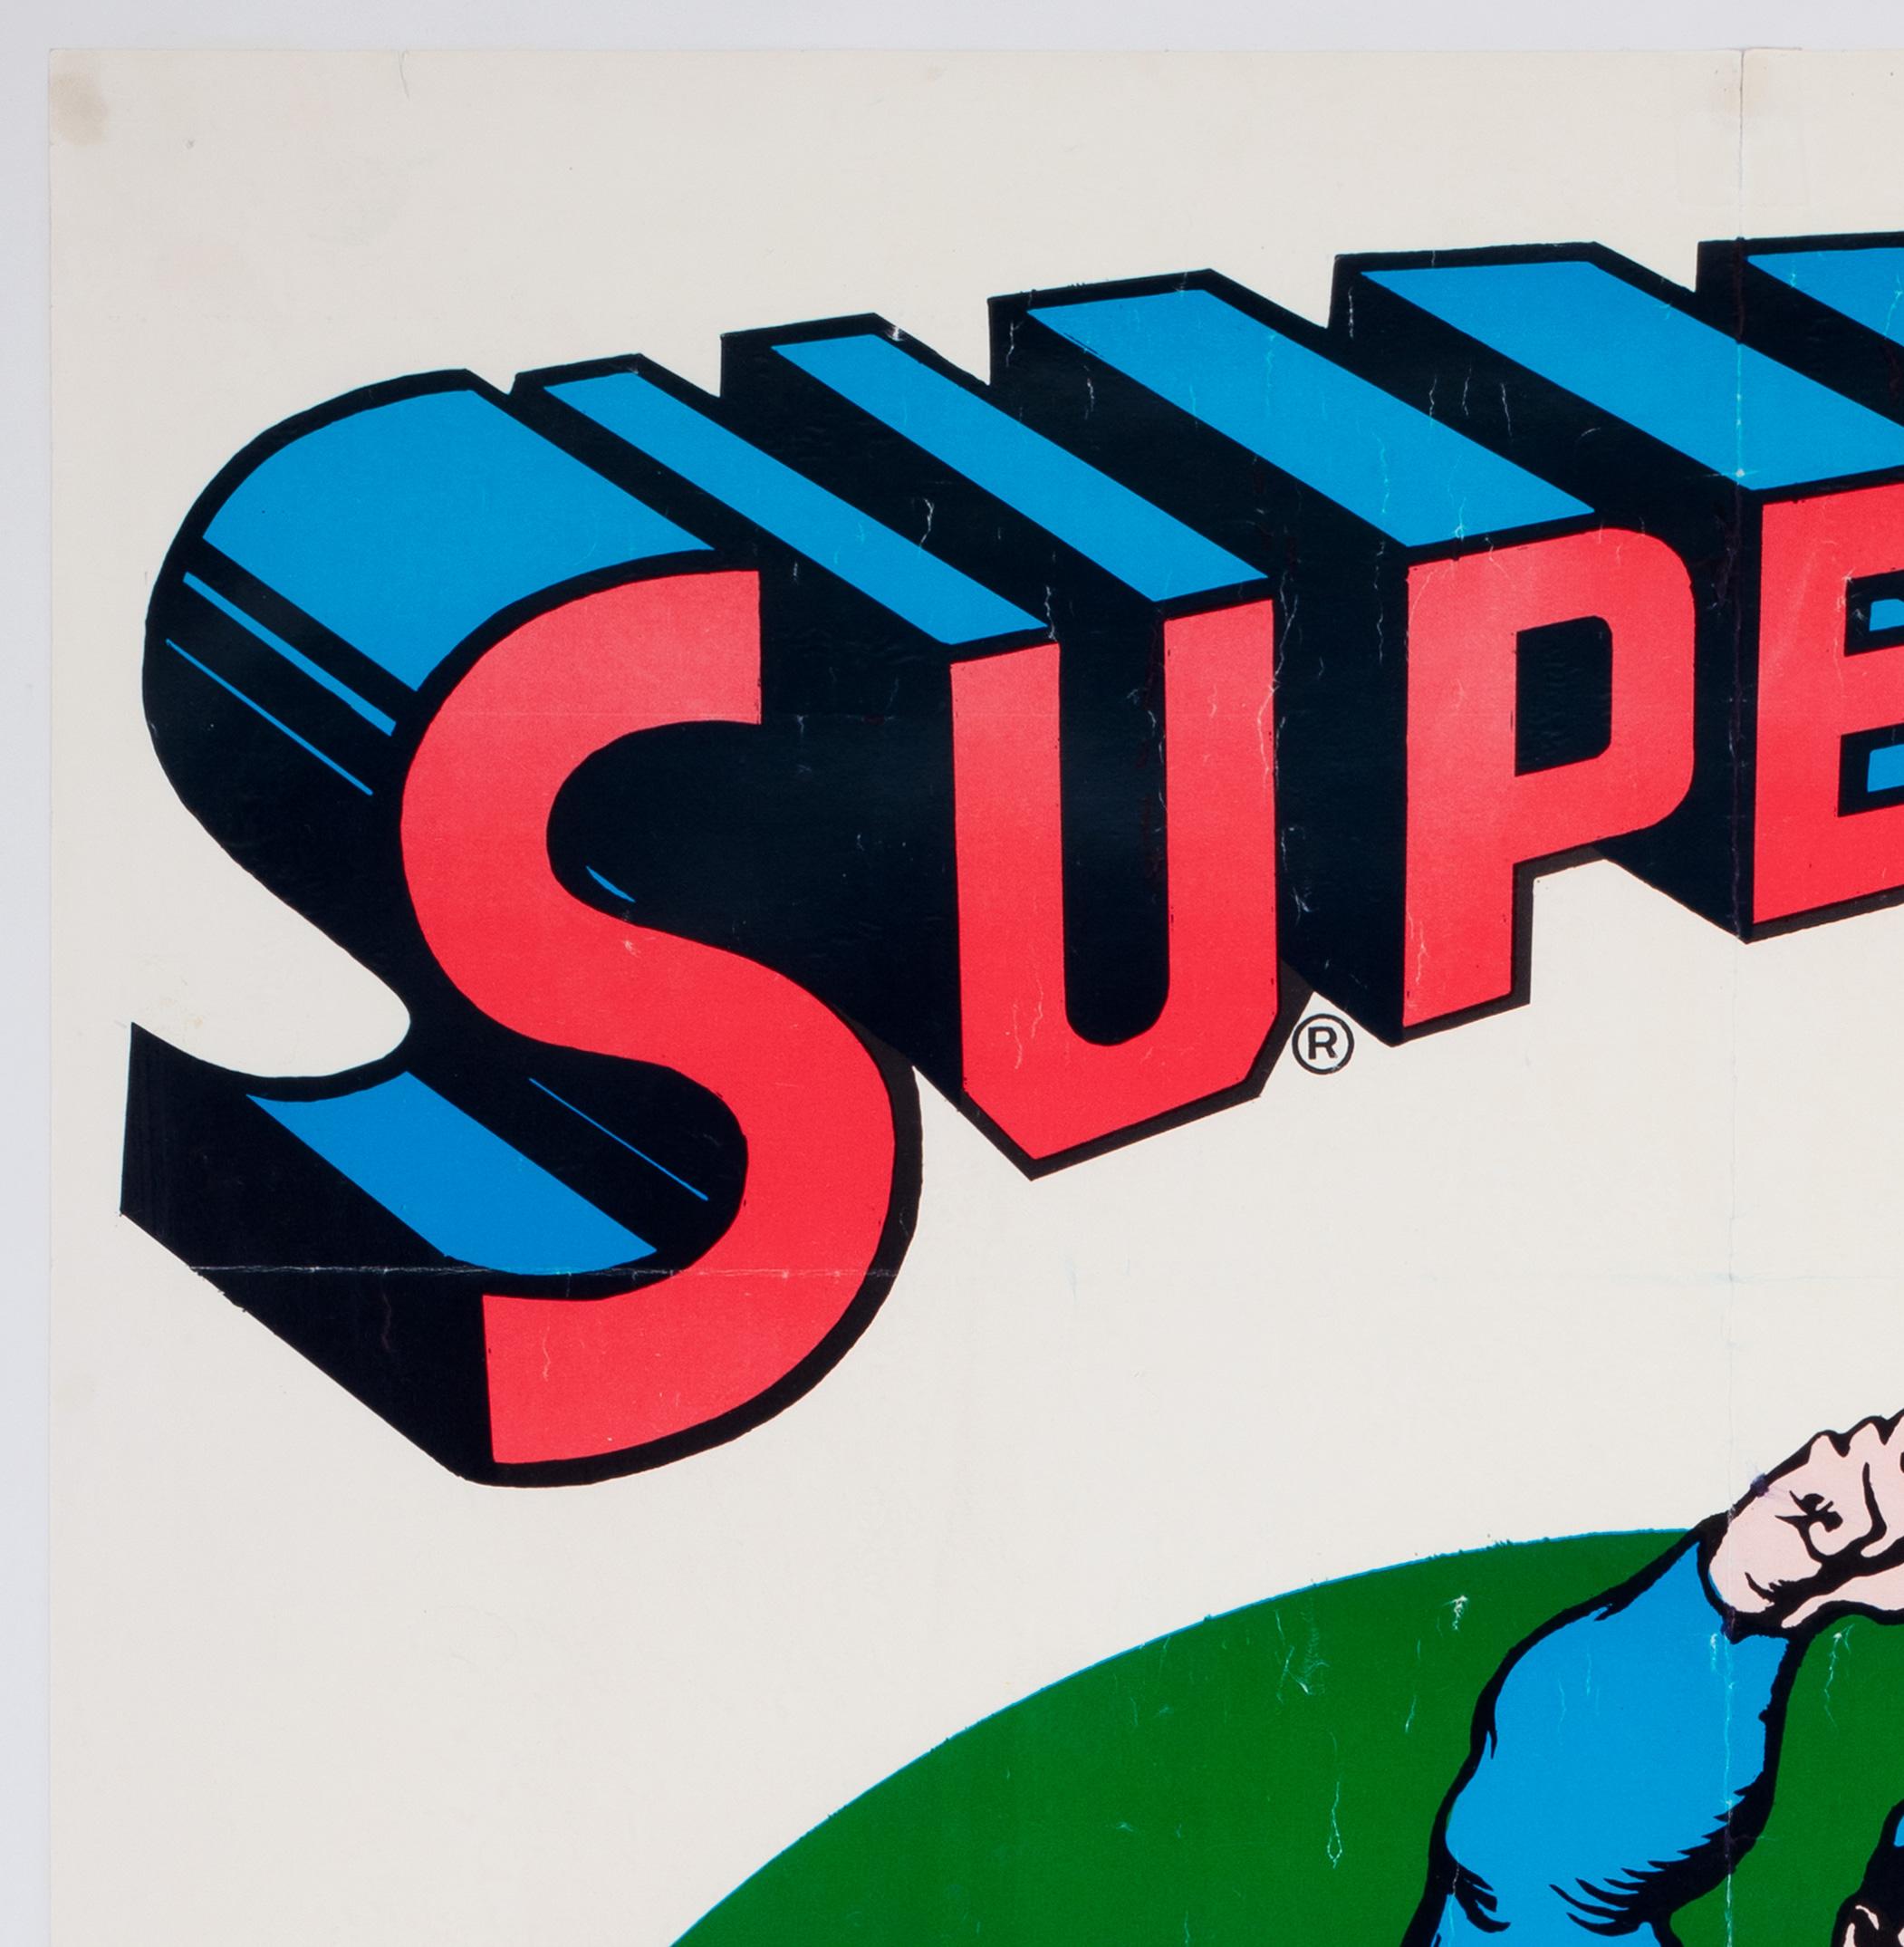 Fabulous original 1970s Superman poster. Printed in Scotland in 1978. Love the colours.

This vintage poster have been professionally linen-backed and is sized 24 1/2 x 37 inches (27 x 39 1/2 including the linen-backing). It will be sent rolled